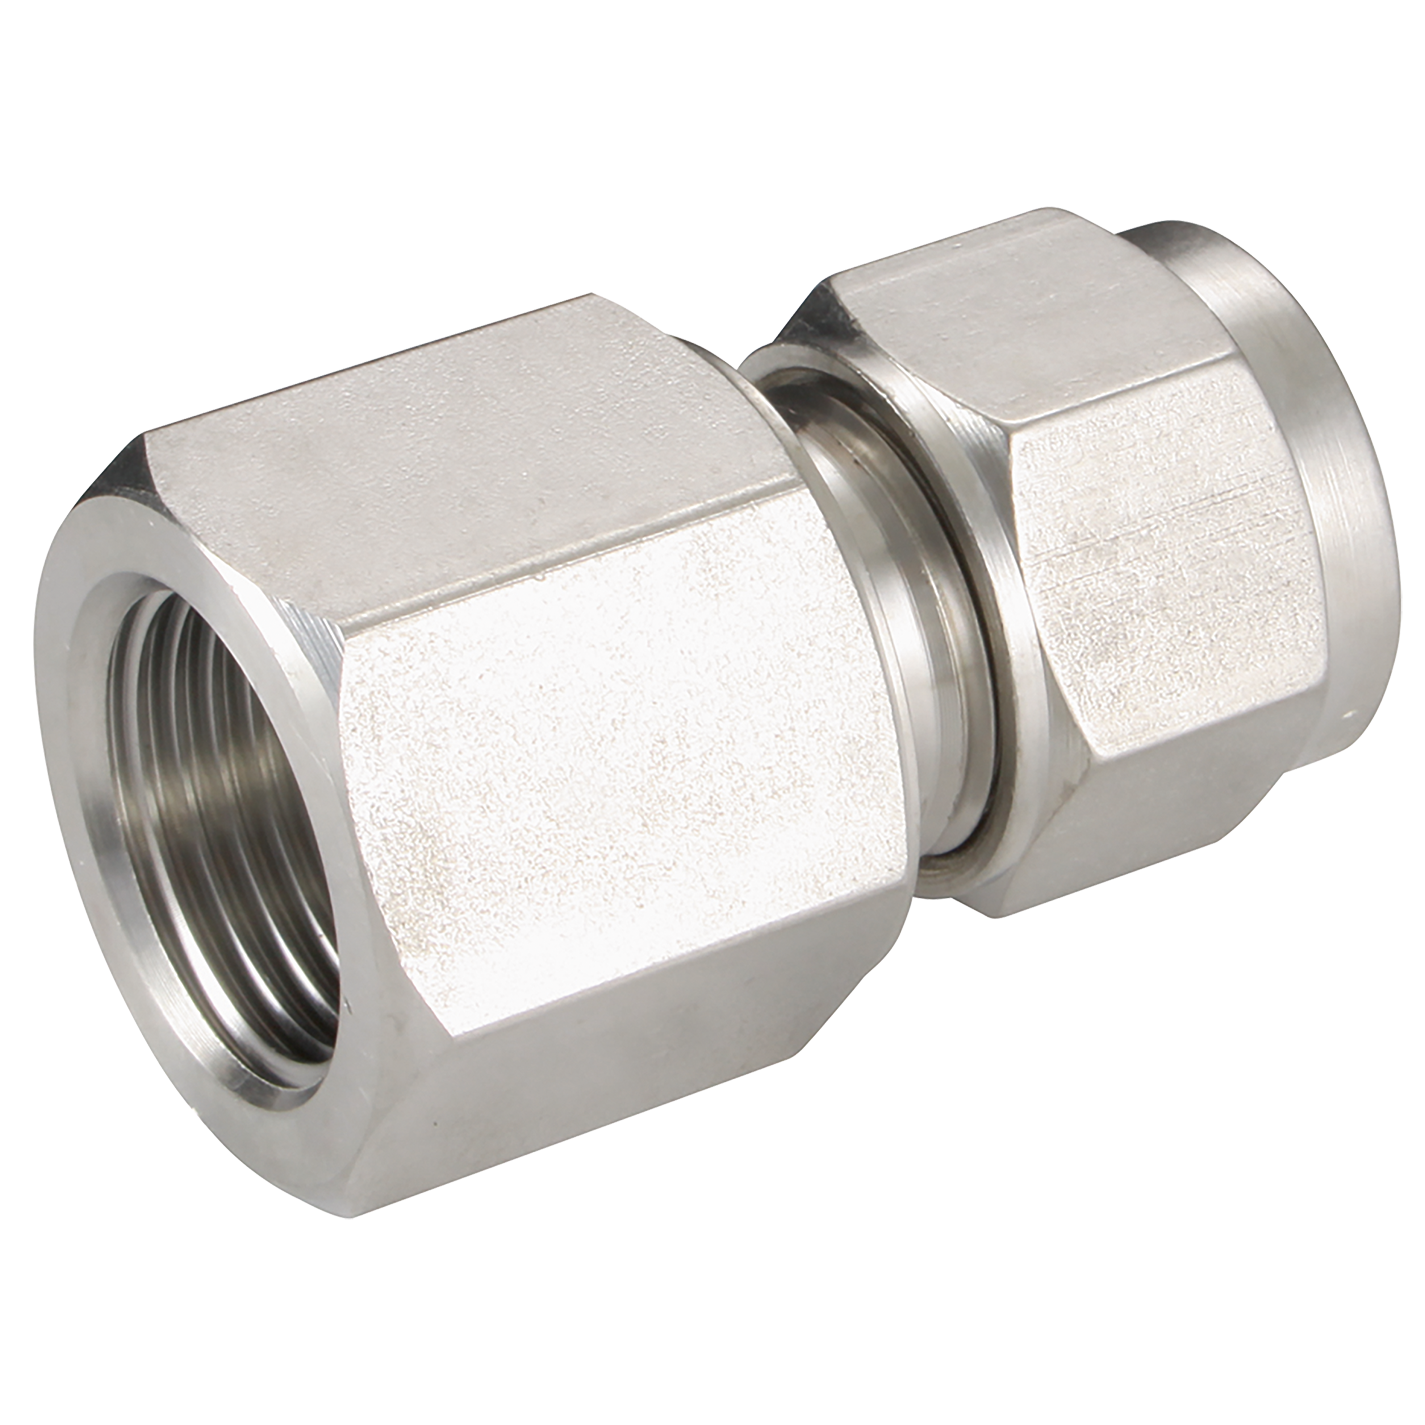 FEMALE CONNECTOR 8 OD 3/8 BSPP